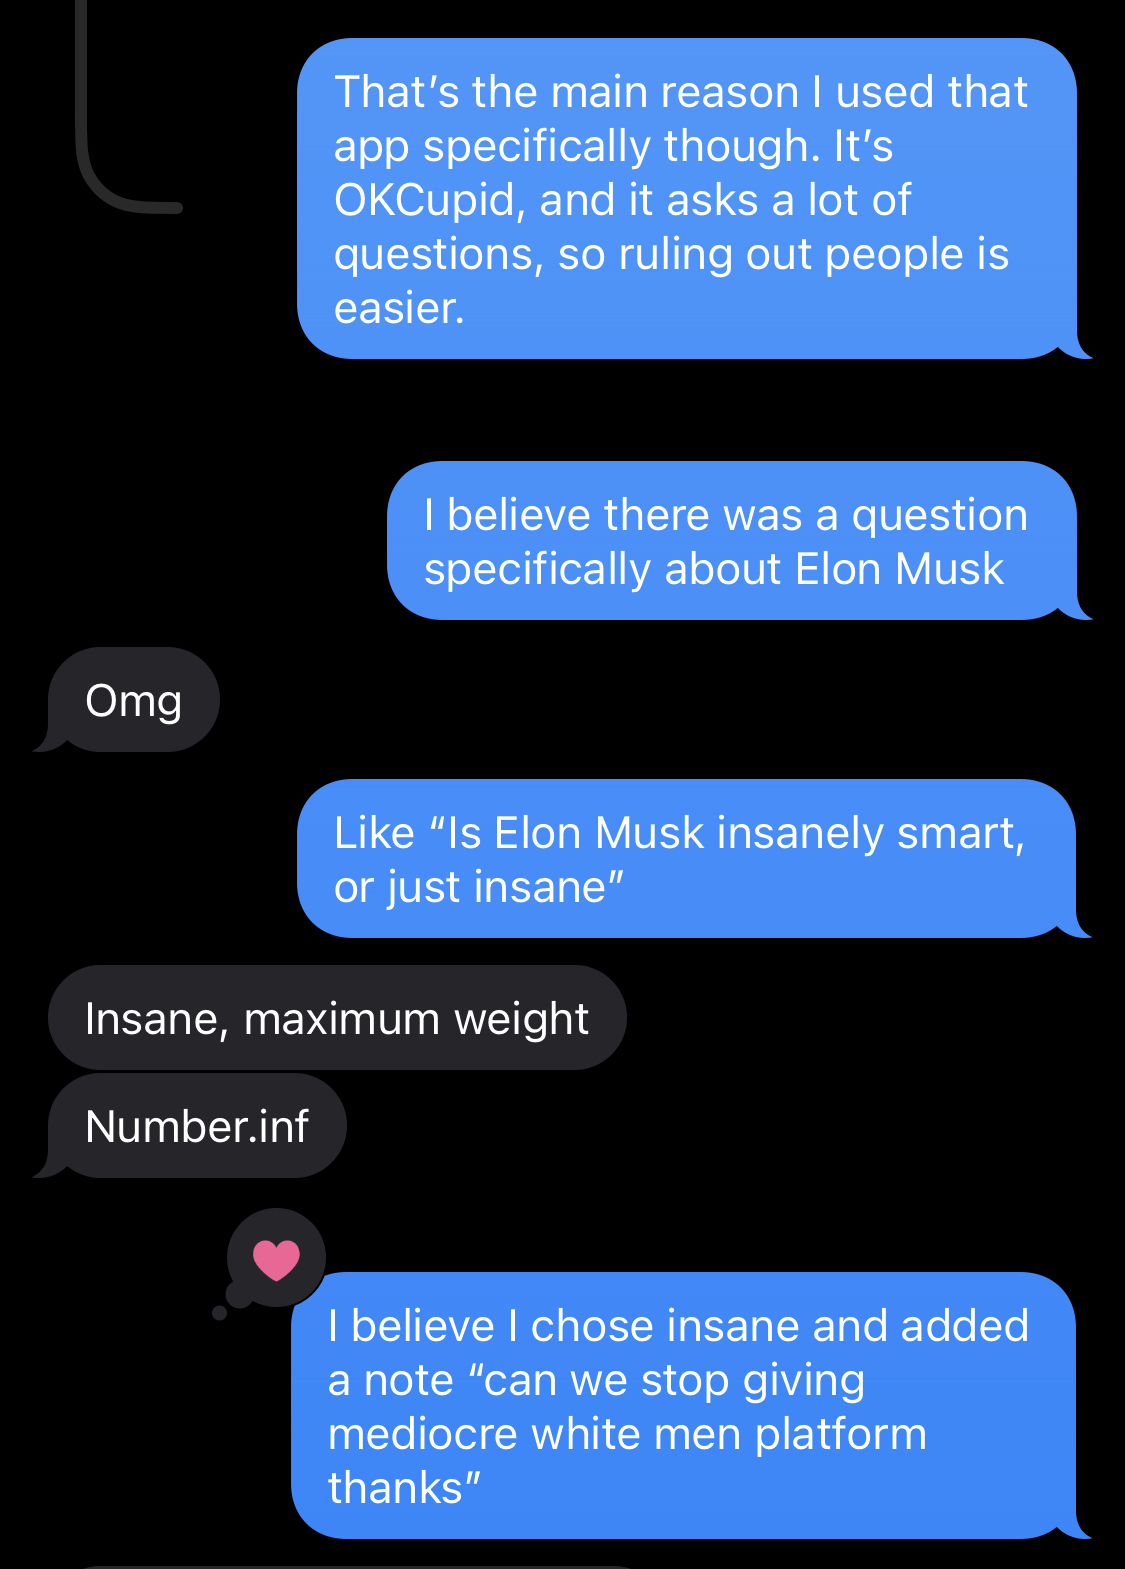 S: That's the main reason I used that app specifically though. It's OKCupid, and it asks a lot of questions, so ruling out people is easier. I believe there was a question specifically about Elon Musk. R: Omg S: Like 